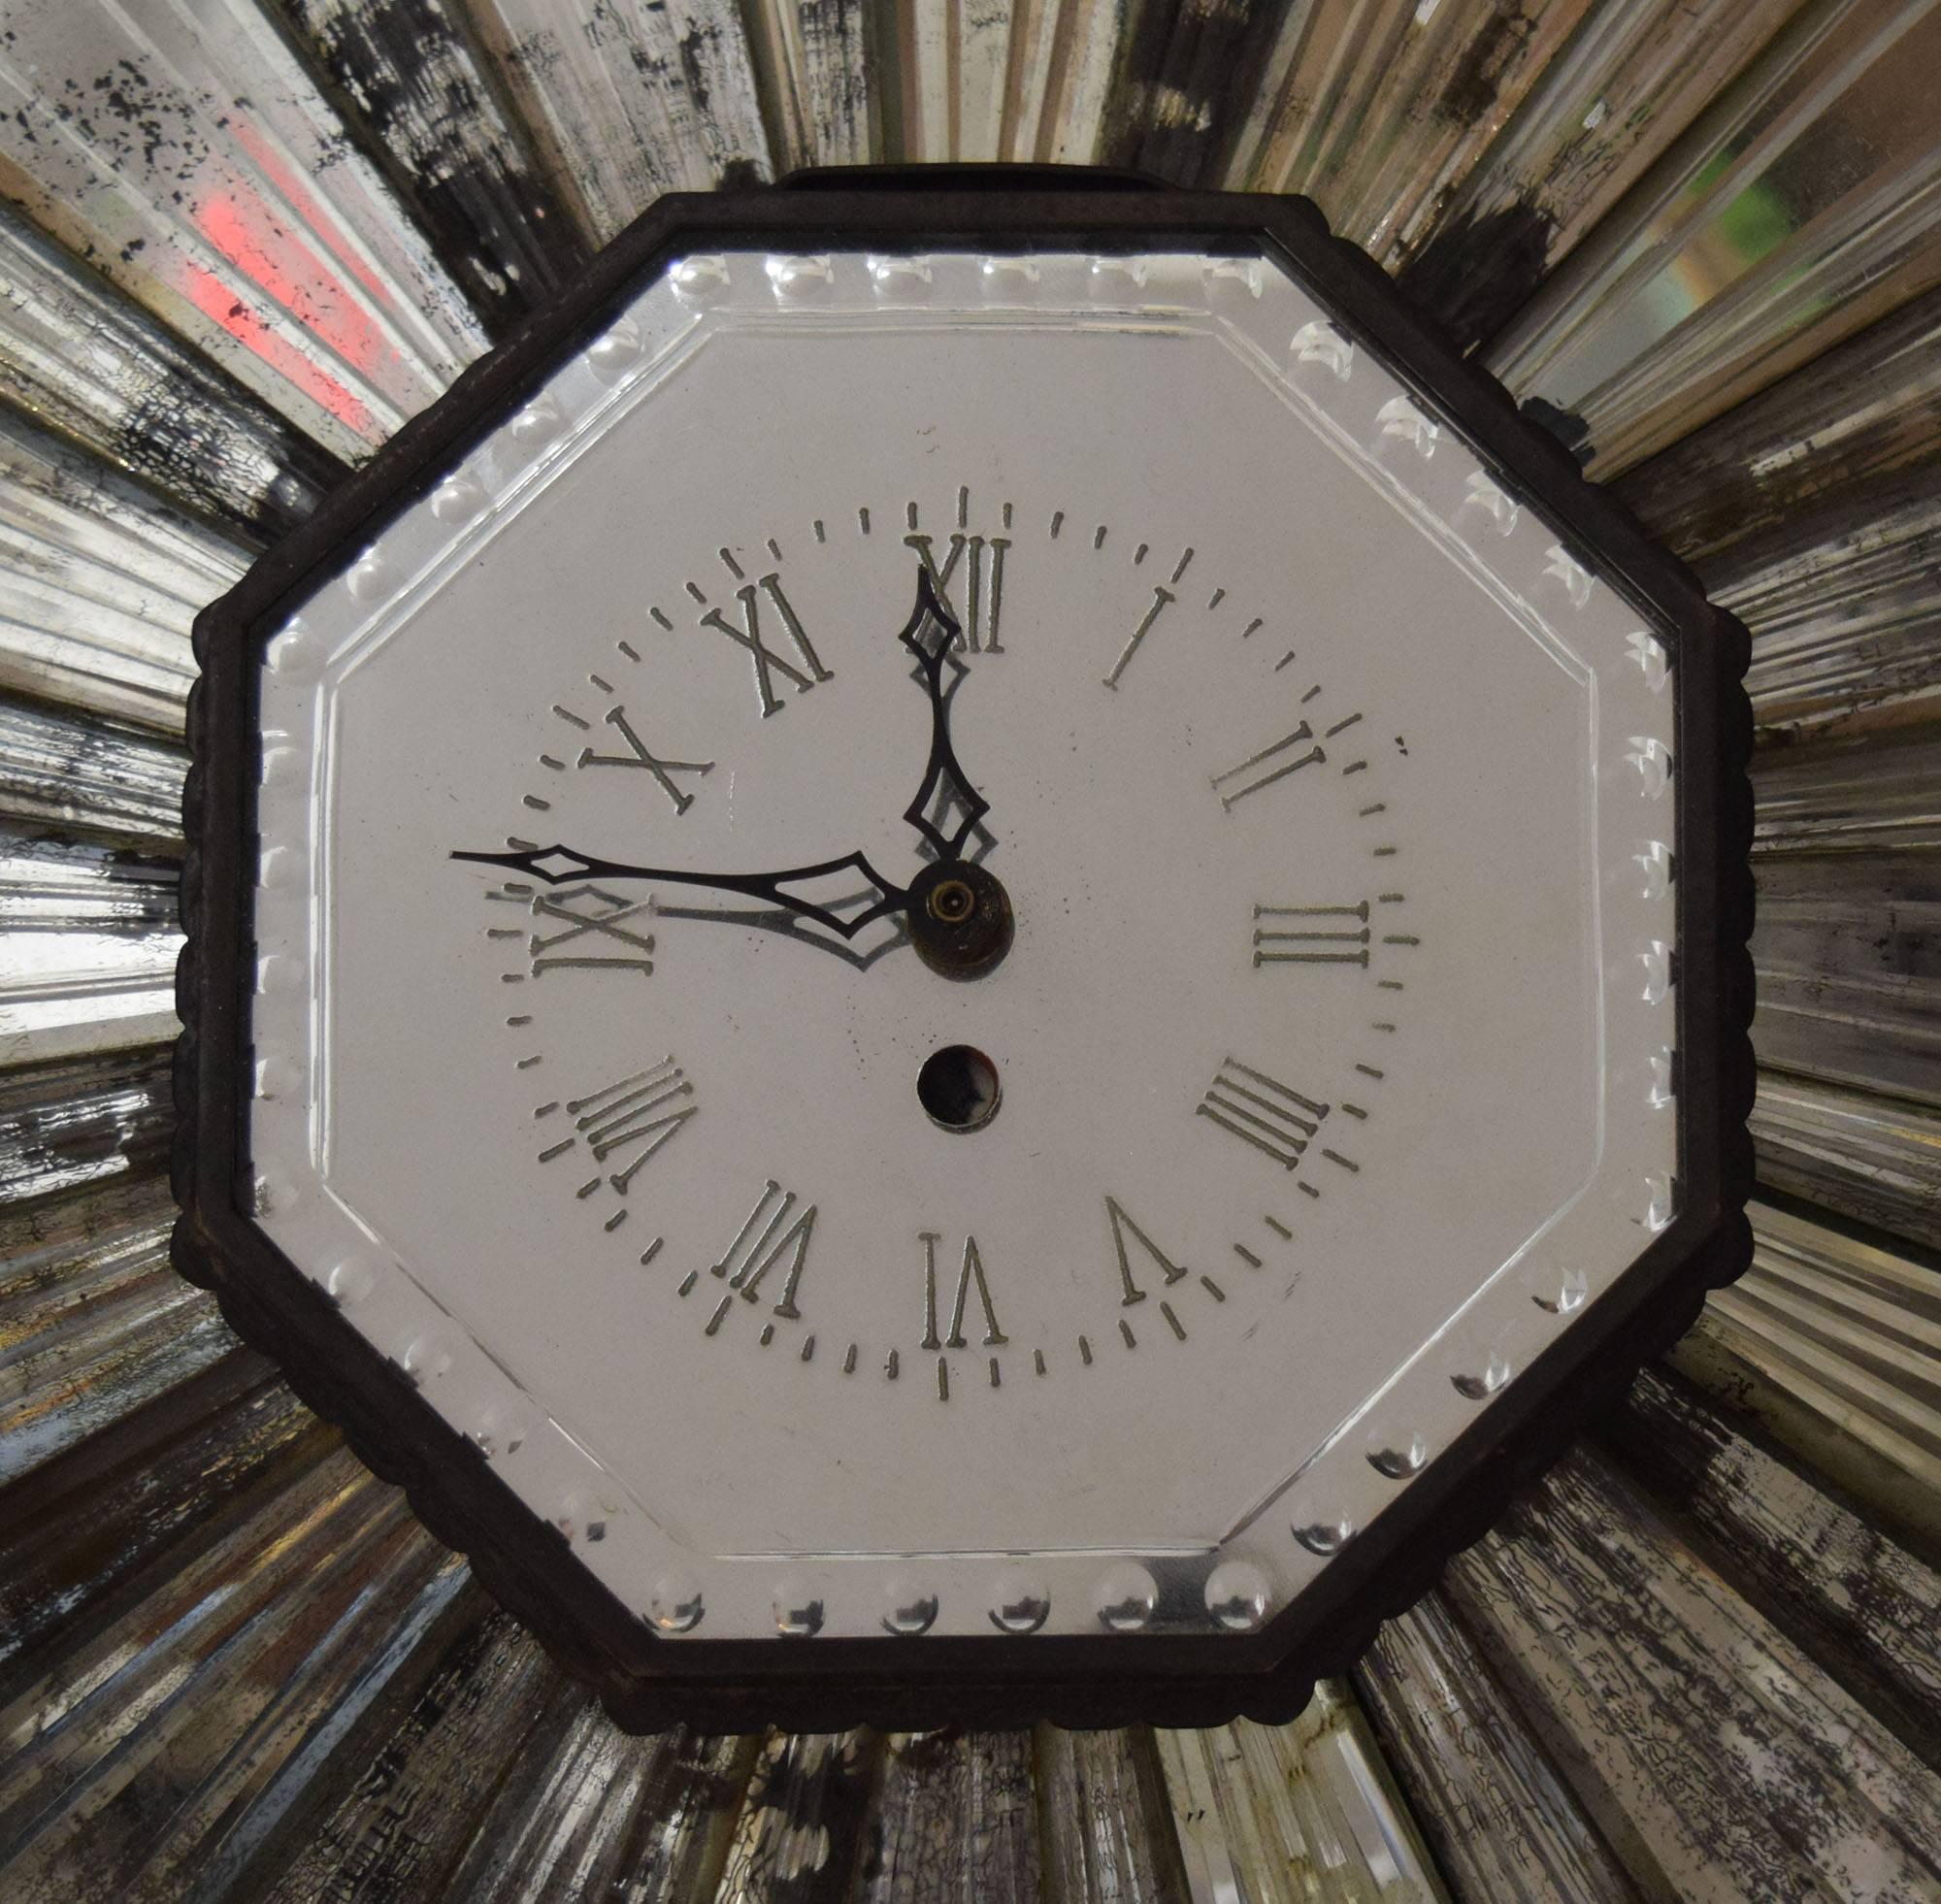 This stylish 1930s sunburst mirrored clock with a mirrored dial was in the Chicago townhouse of Mr. and Mrs. Watson Blair, and subsequently their Palm Beach house. It was probably purchased for the Blairs by David Adler who decorated the townhouse,